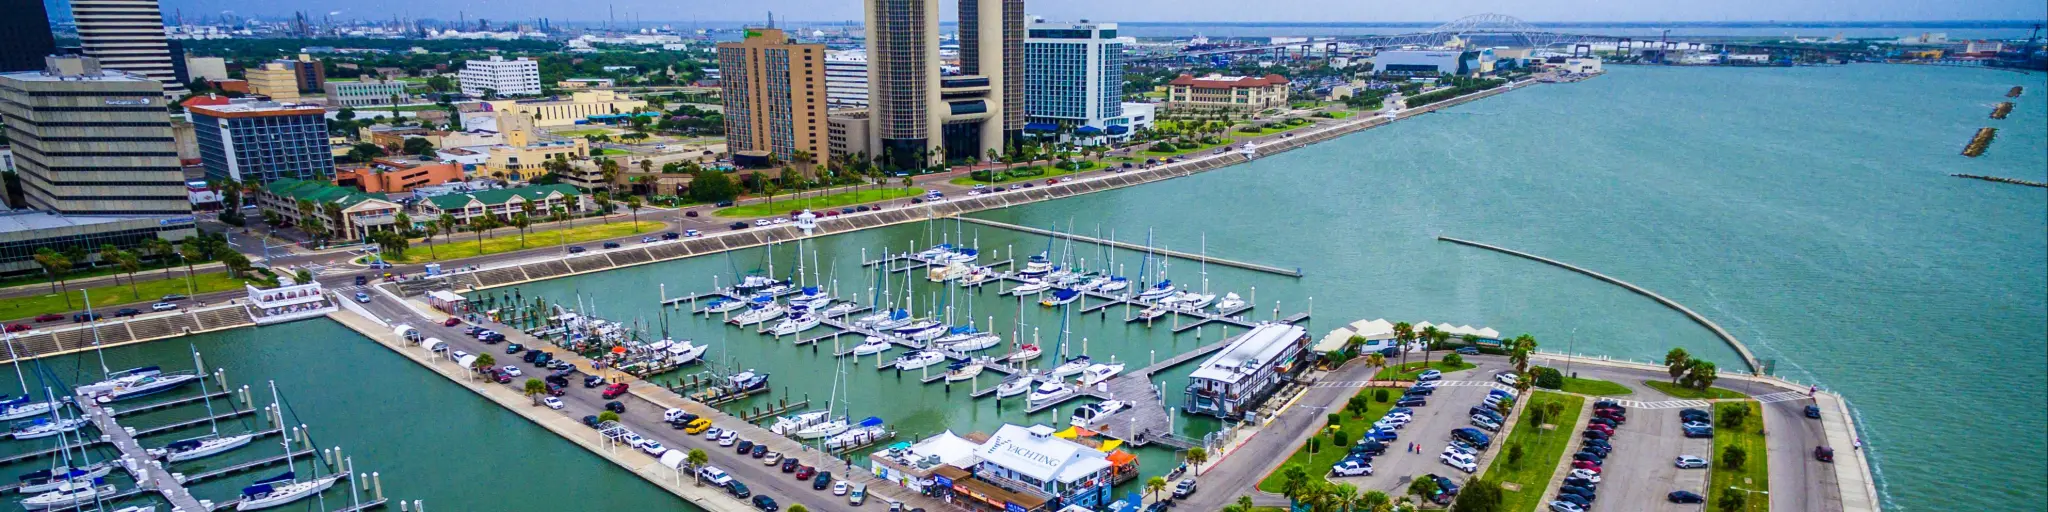 Skyline view of Corpus Christi Texas, overlooking harbor bridge and rows of piers filled with boats and sailboats 